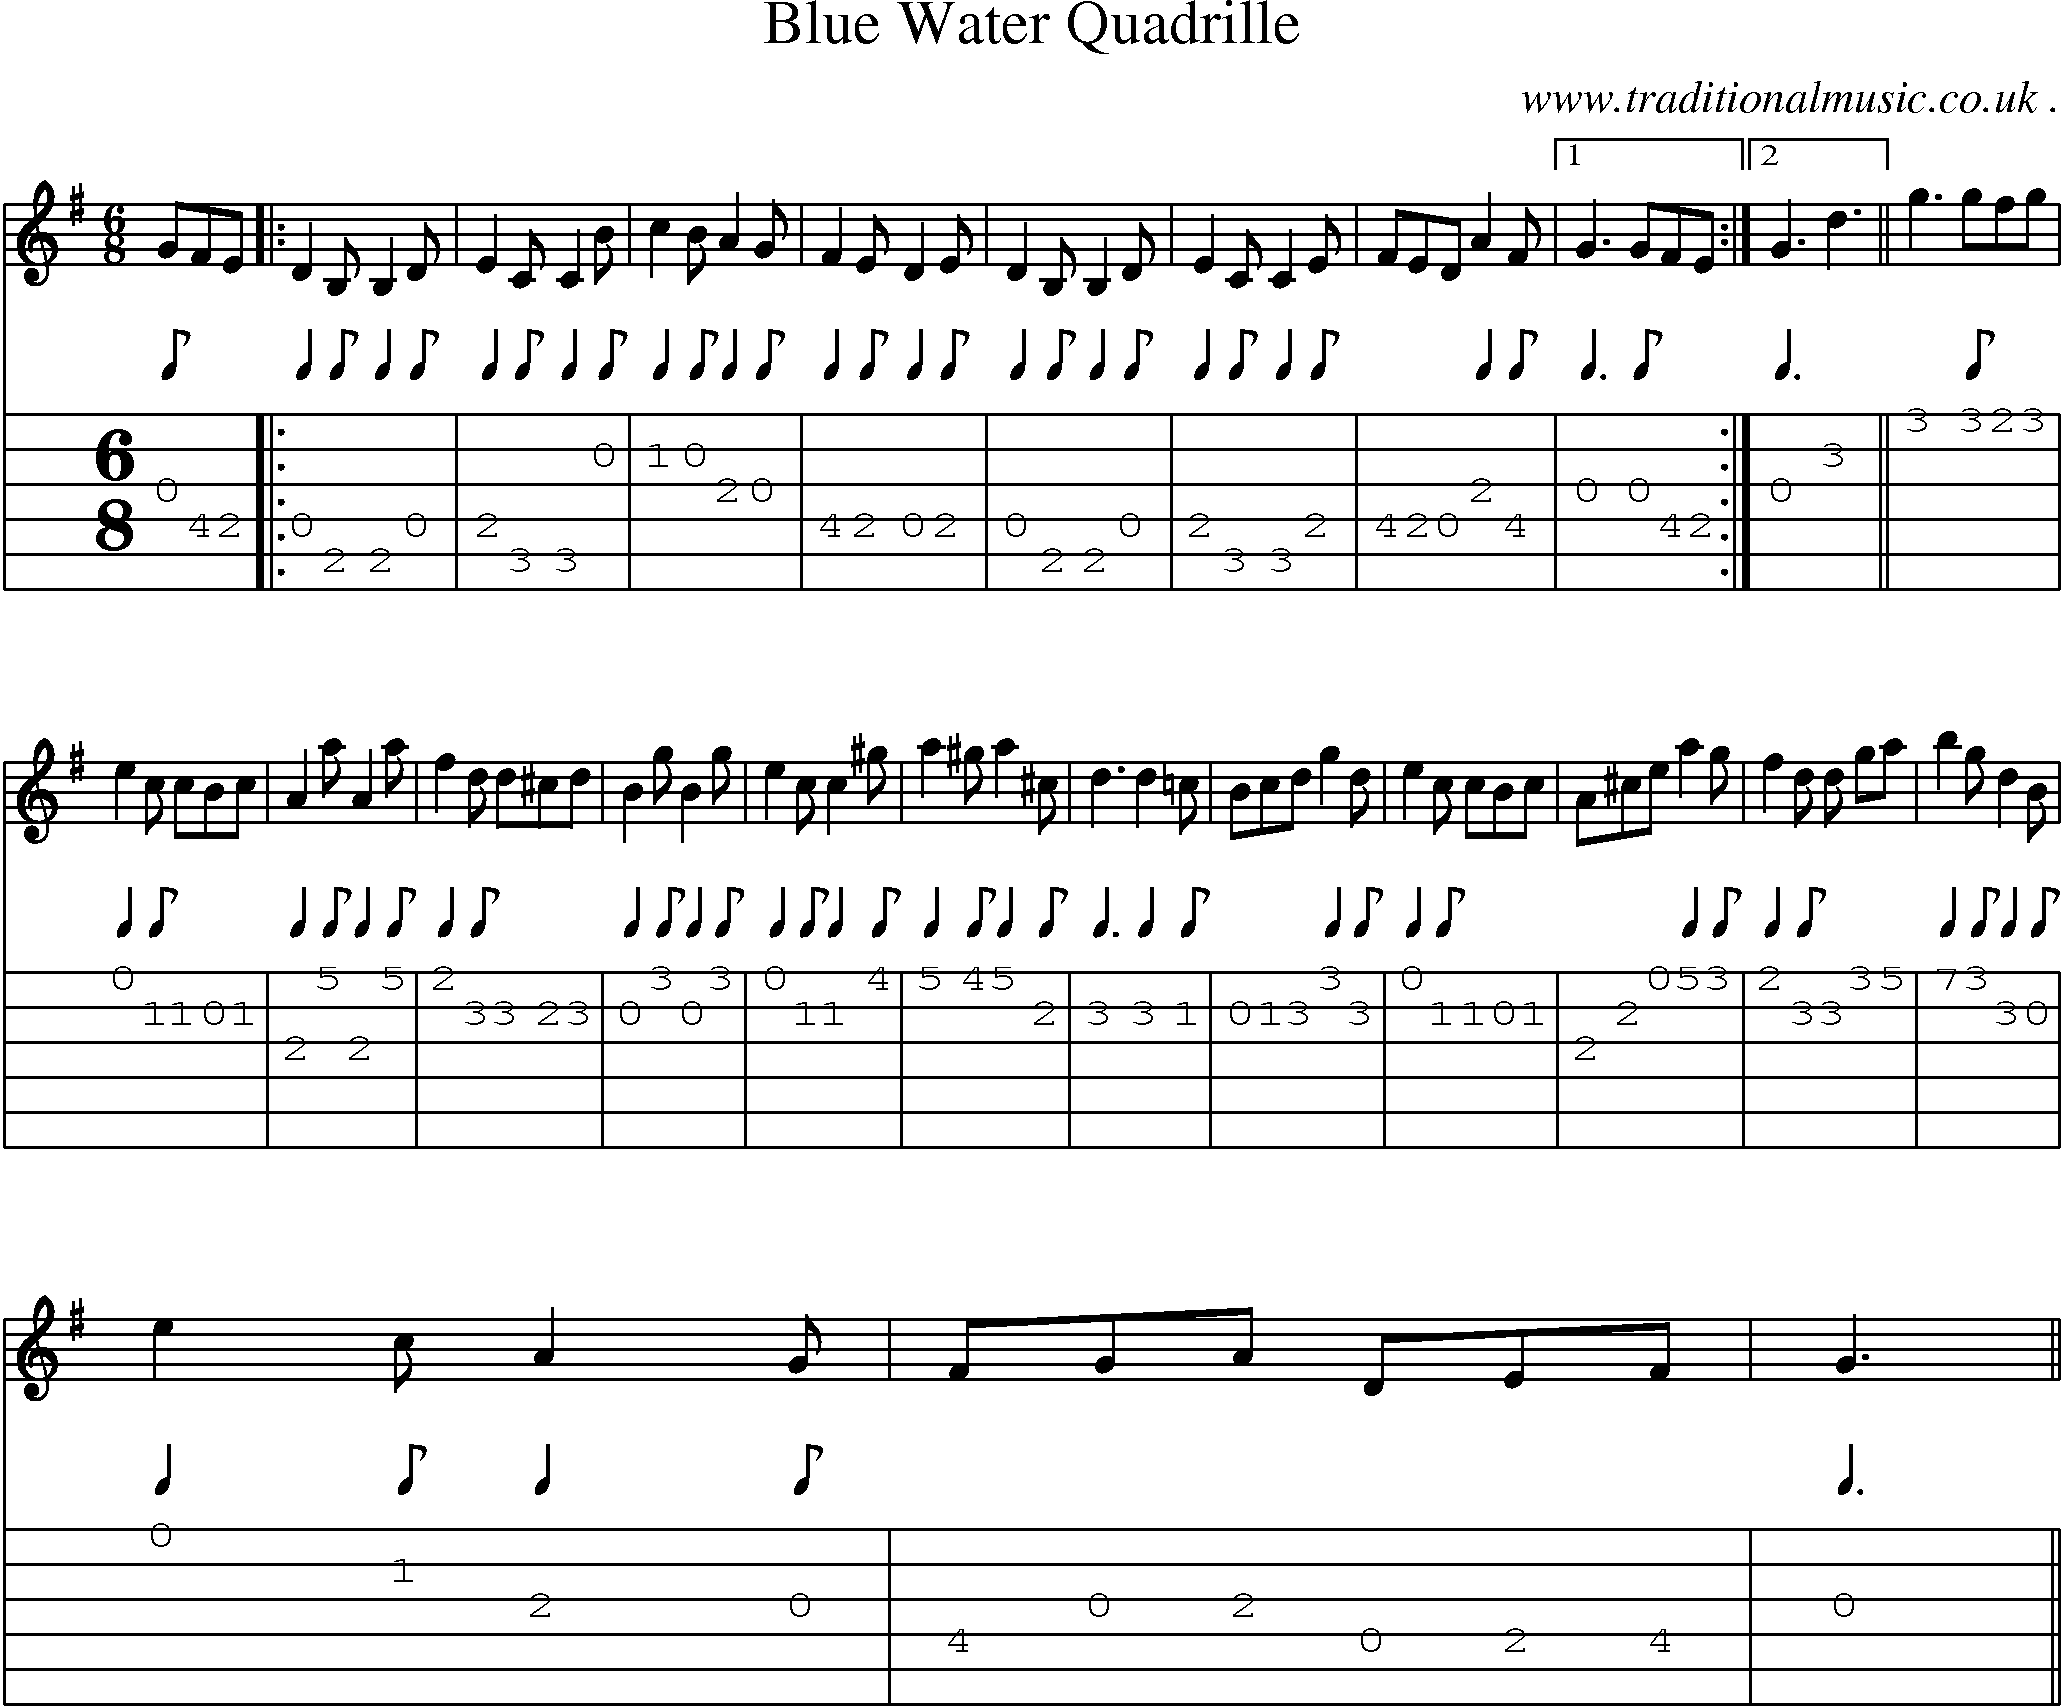 Music Score and Guitar Tabs for Blue Water Quadrille